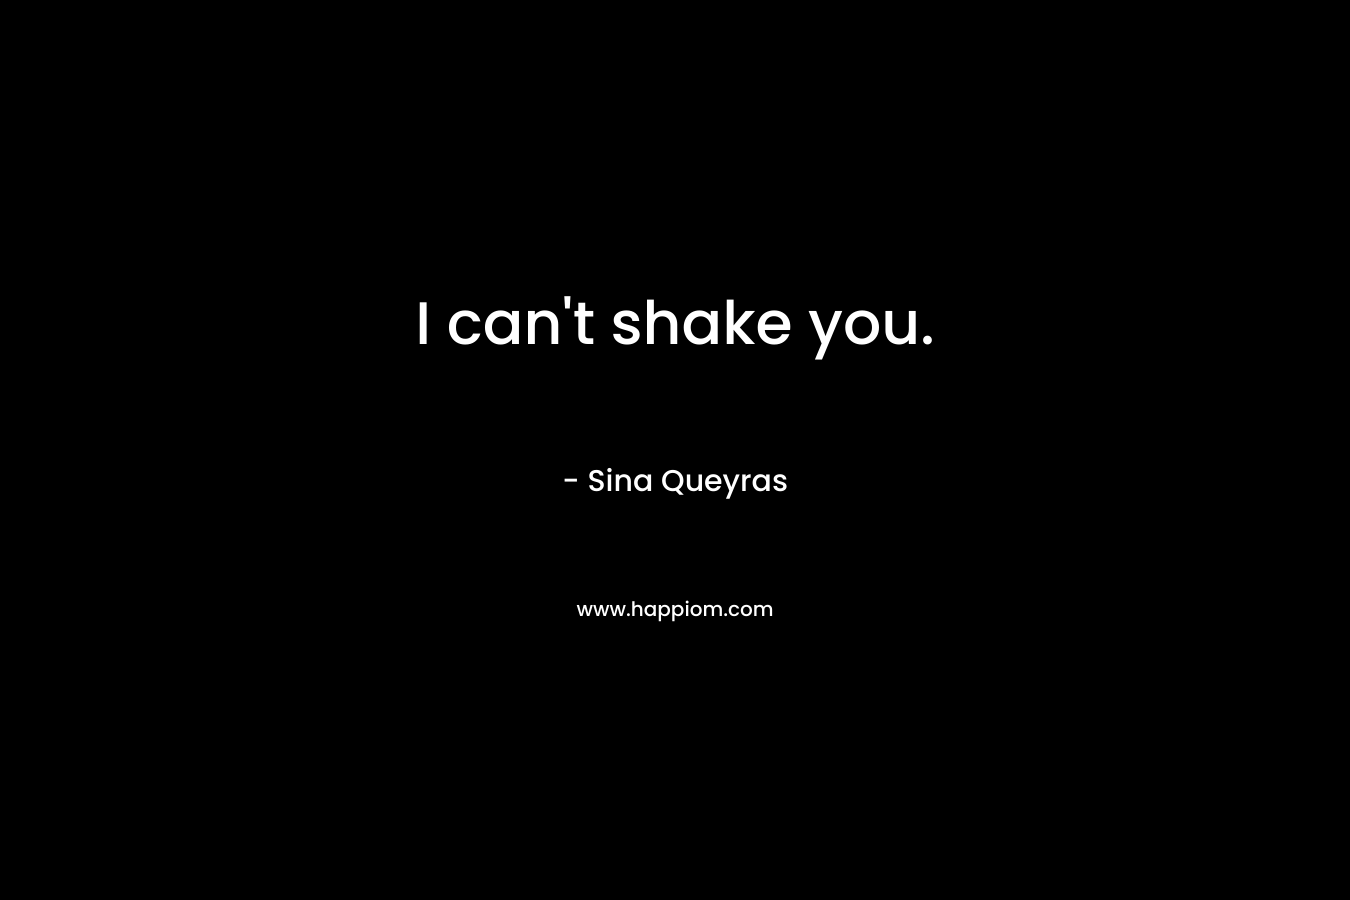 I can't shake you.